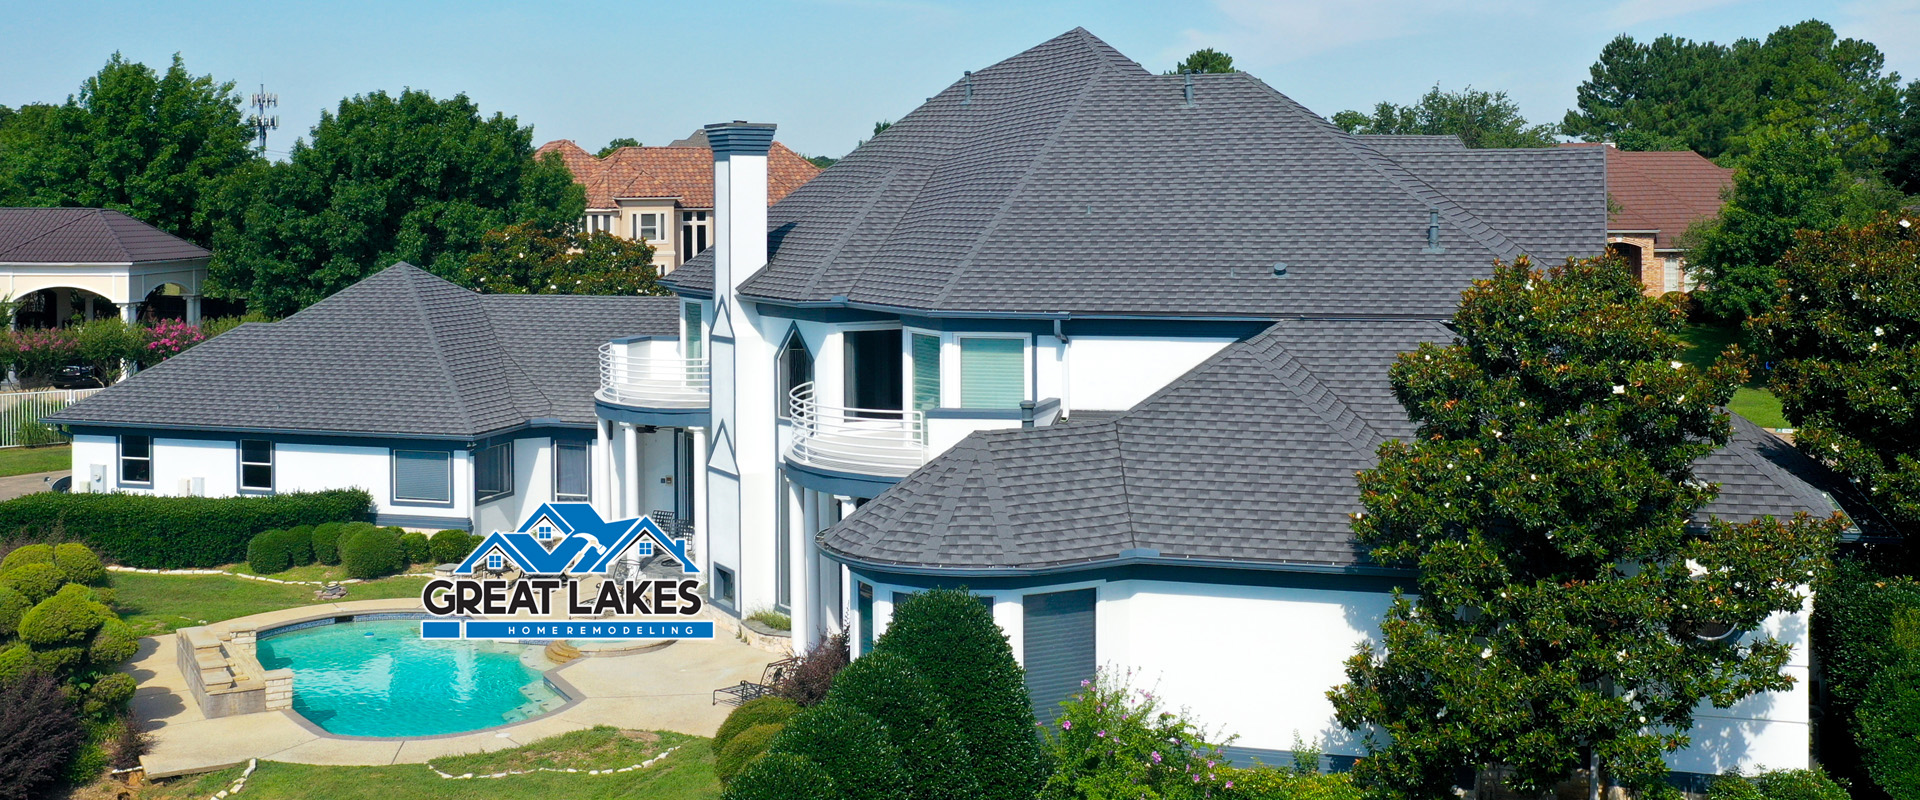 Quality Roofing, Siding and Windows in Ohio and Michigan